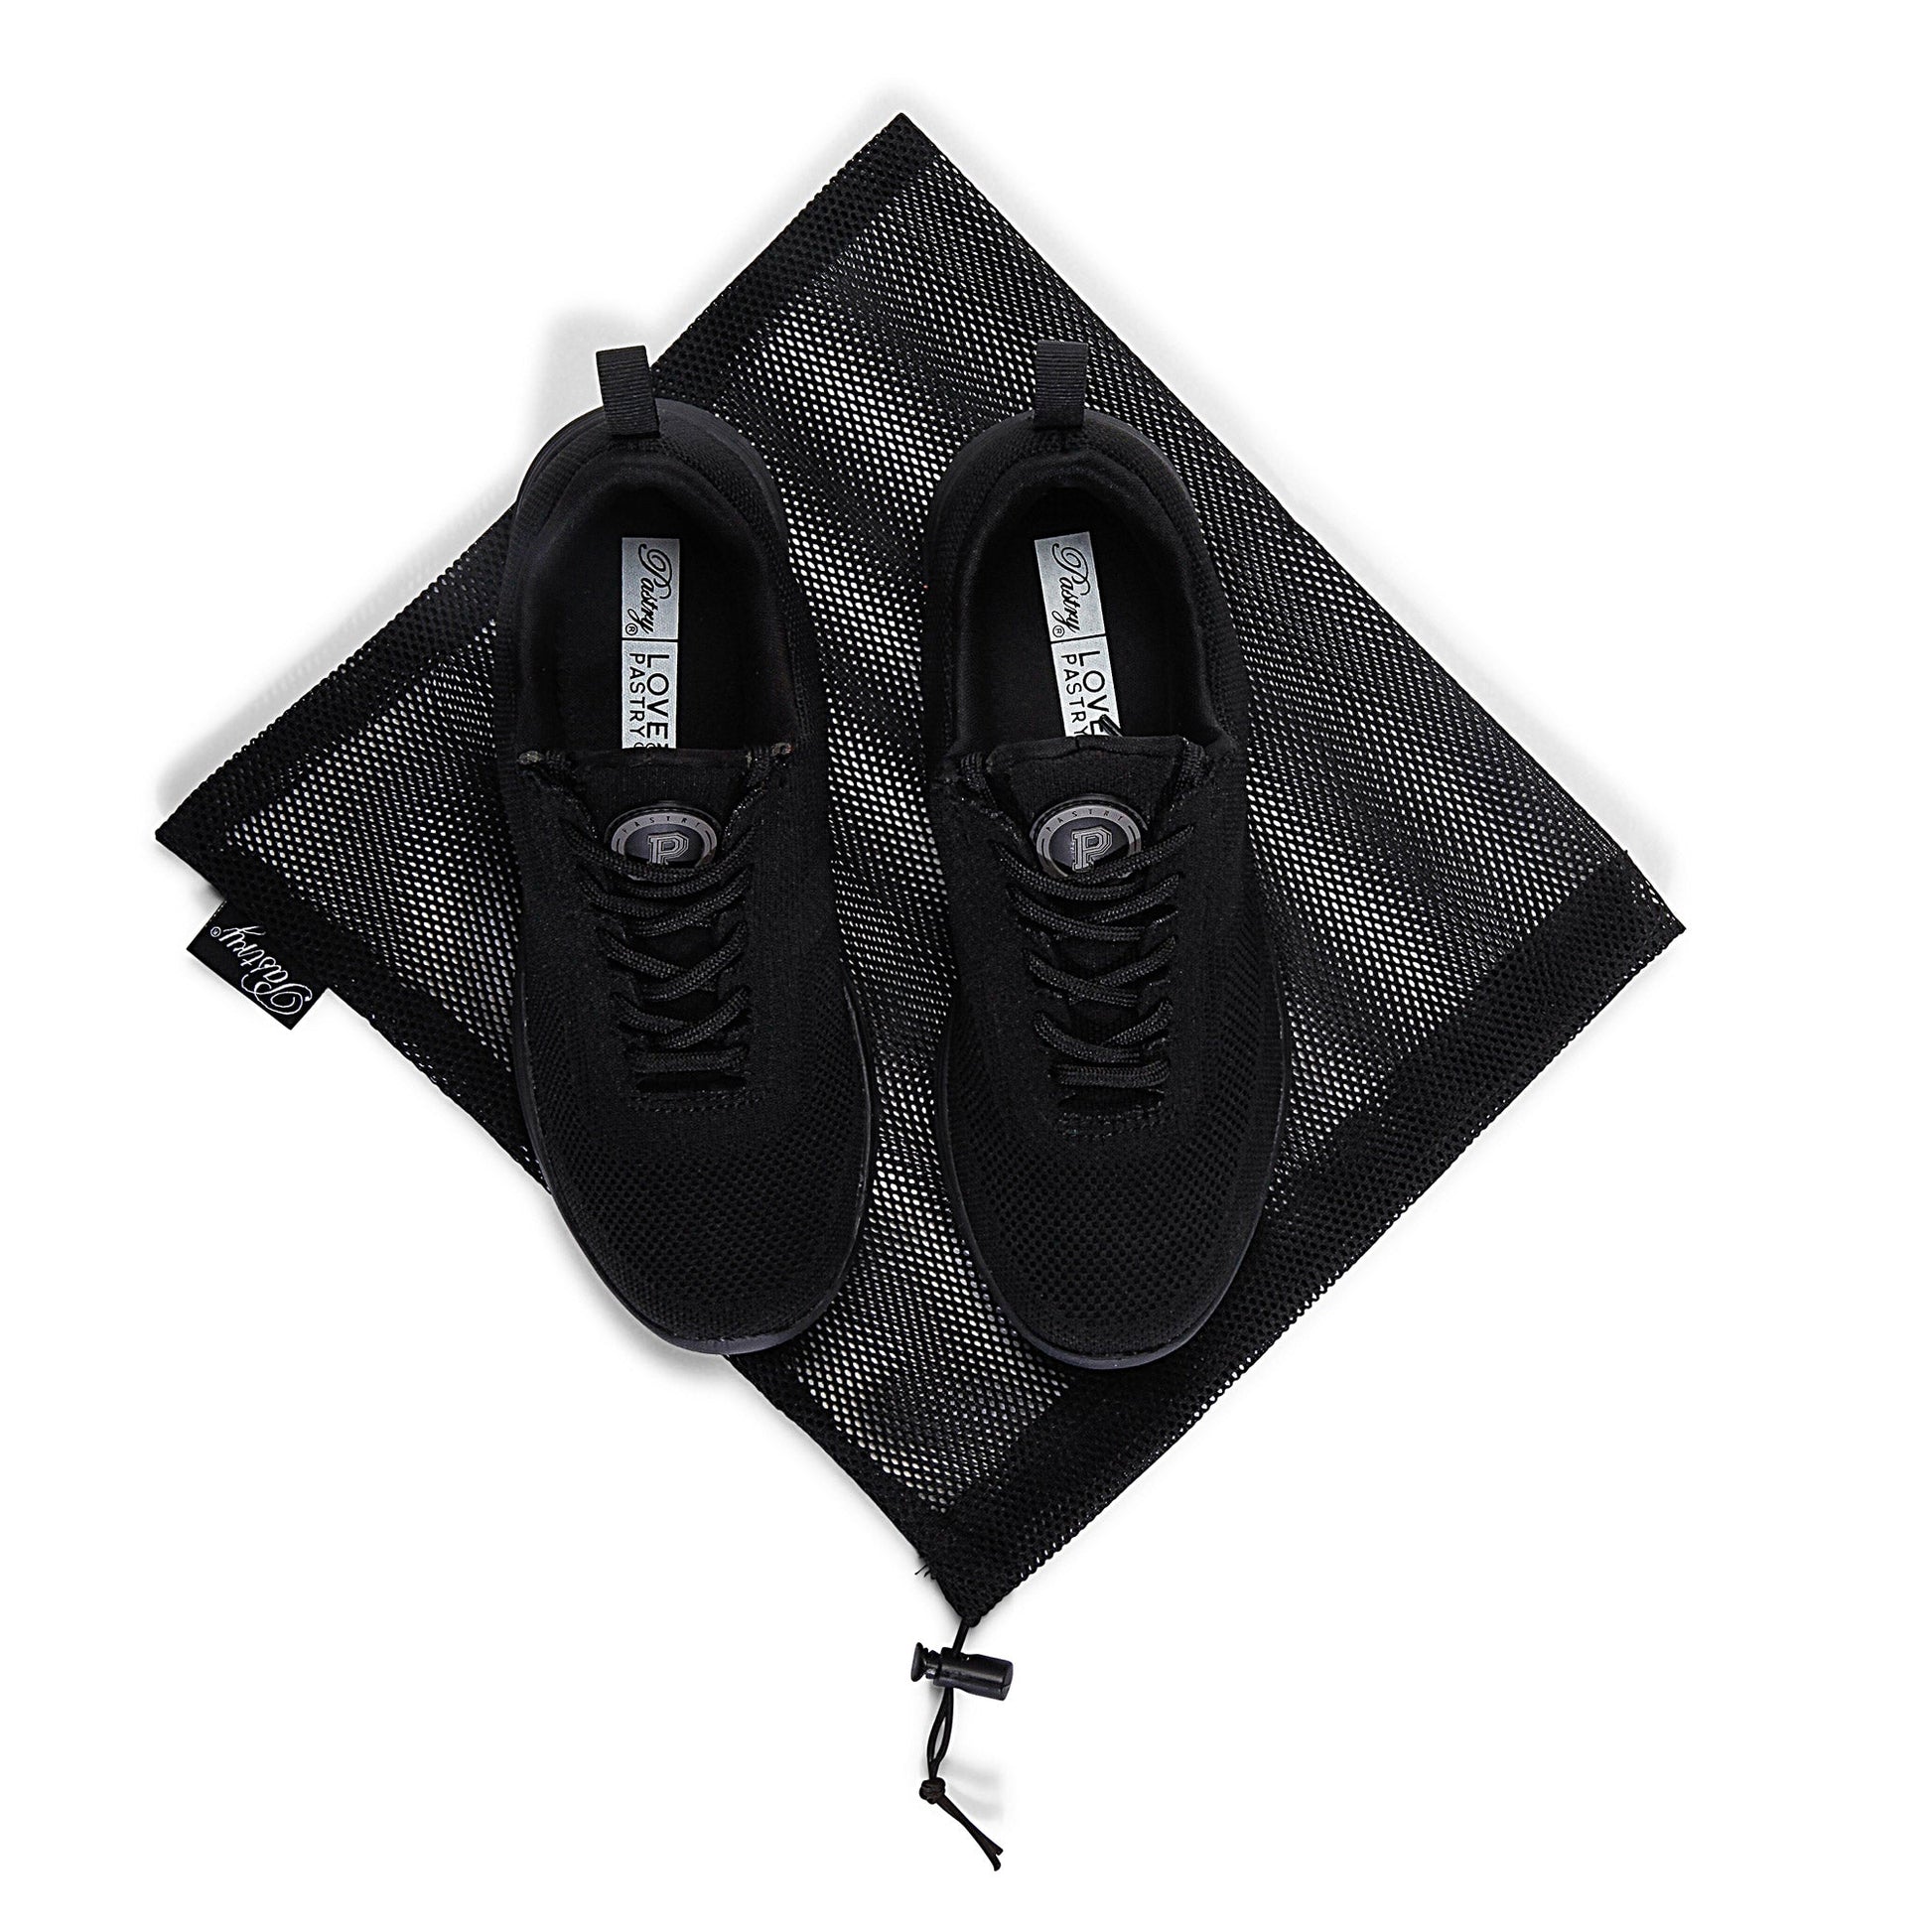 Pastry Studio TR2 Youth Sneaker in Black/Black with bag